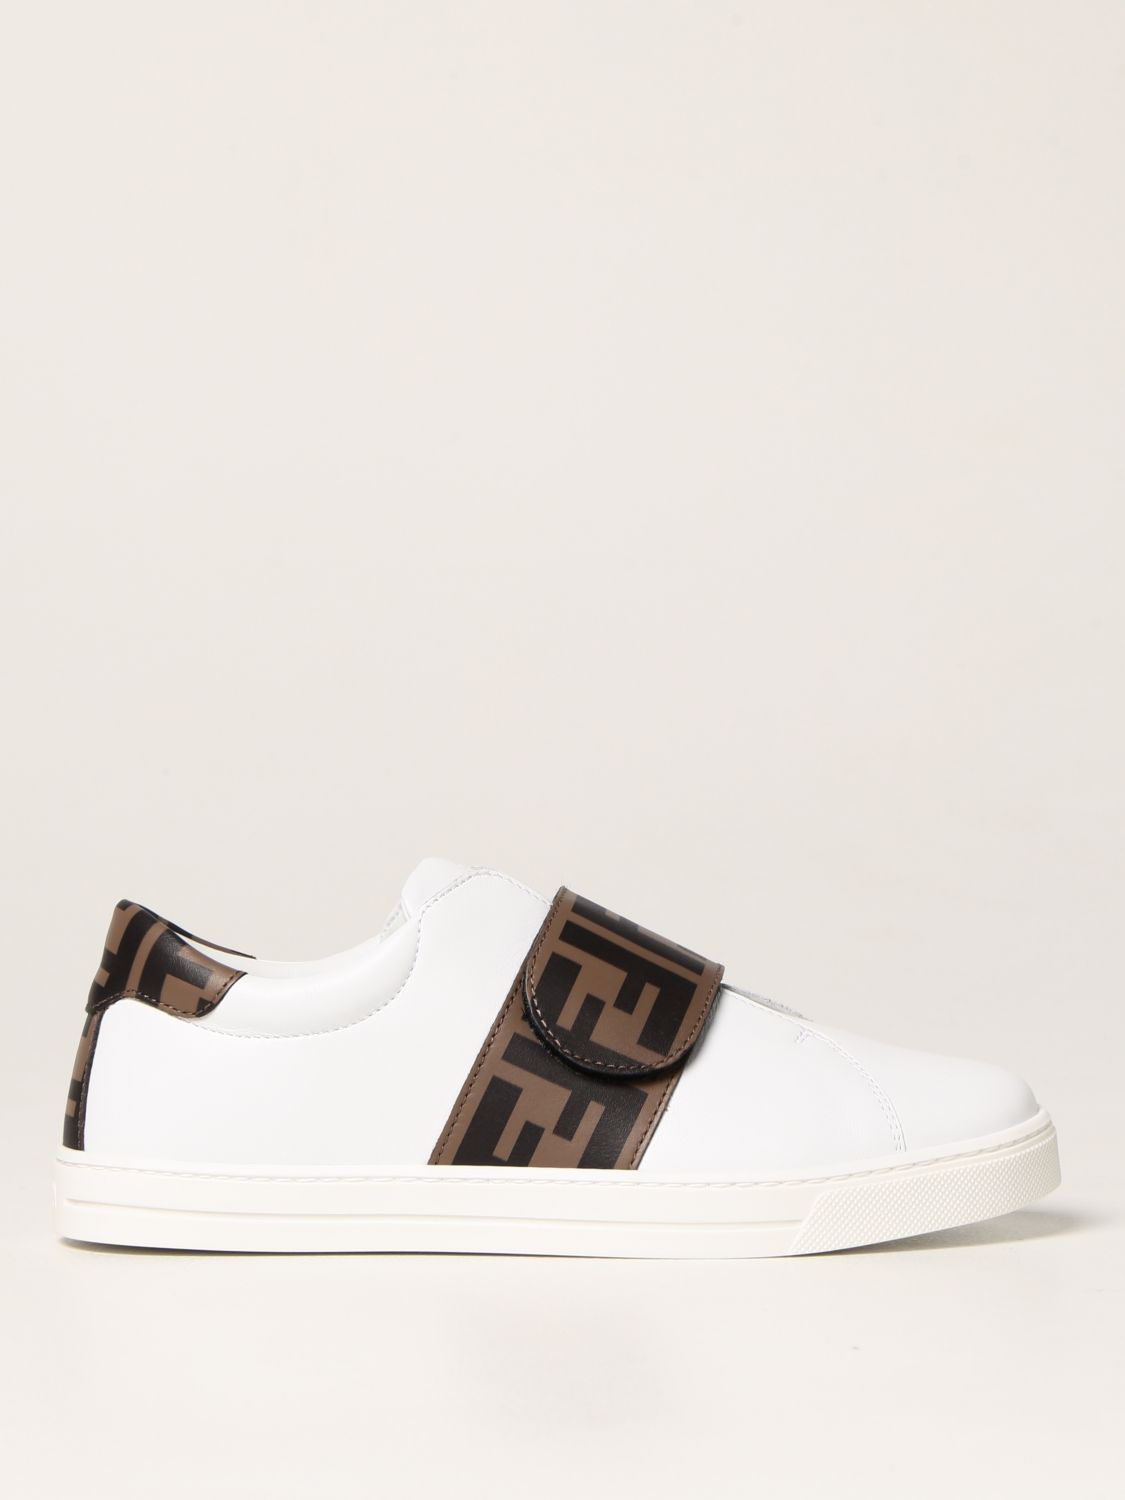 Fendi Kids' Sneakers In Leather With Ff Logo In White | ModeSens